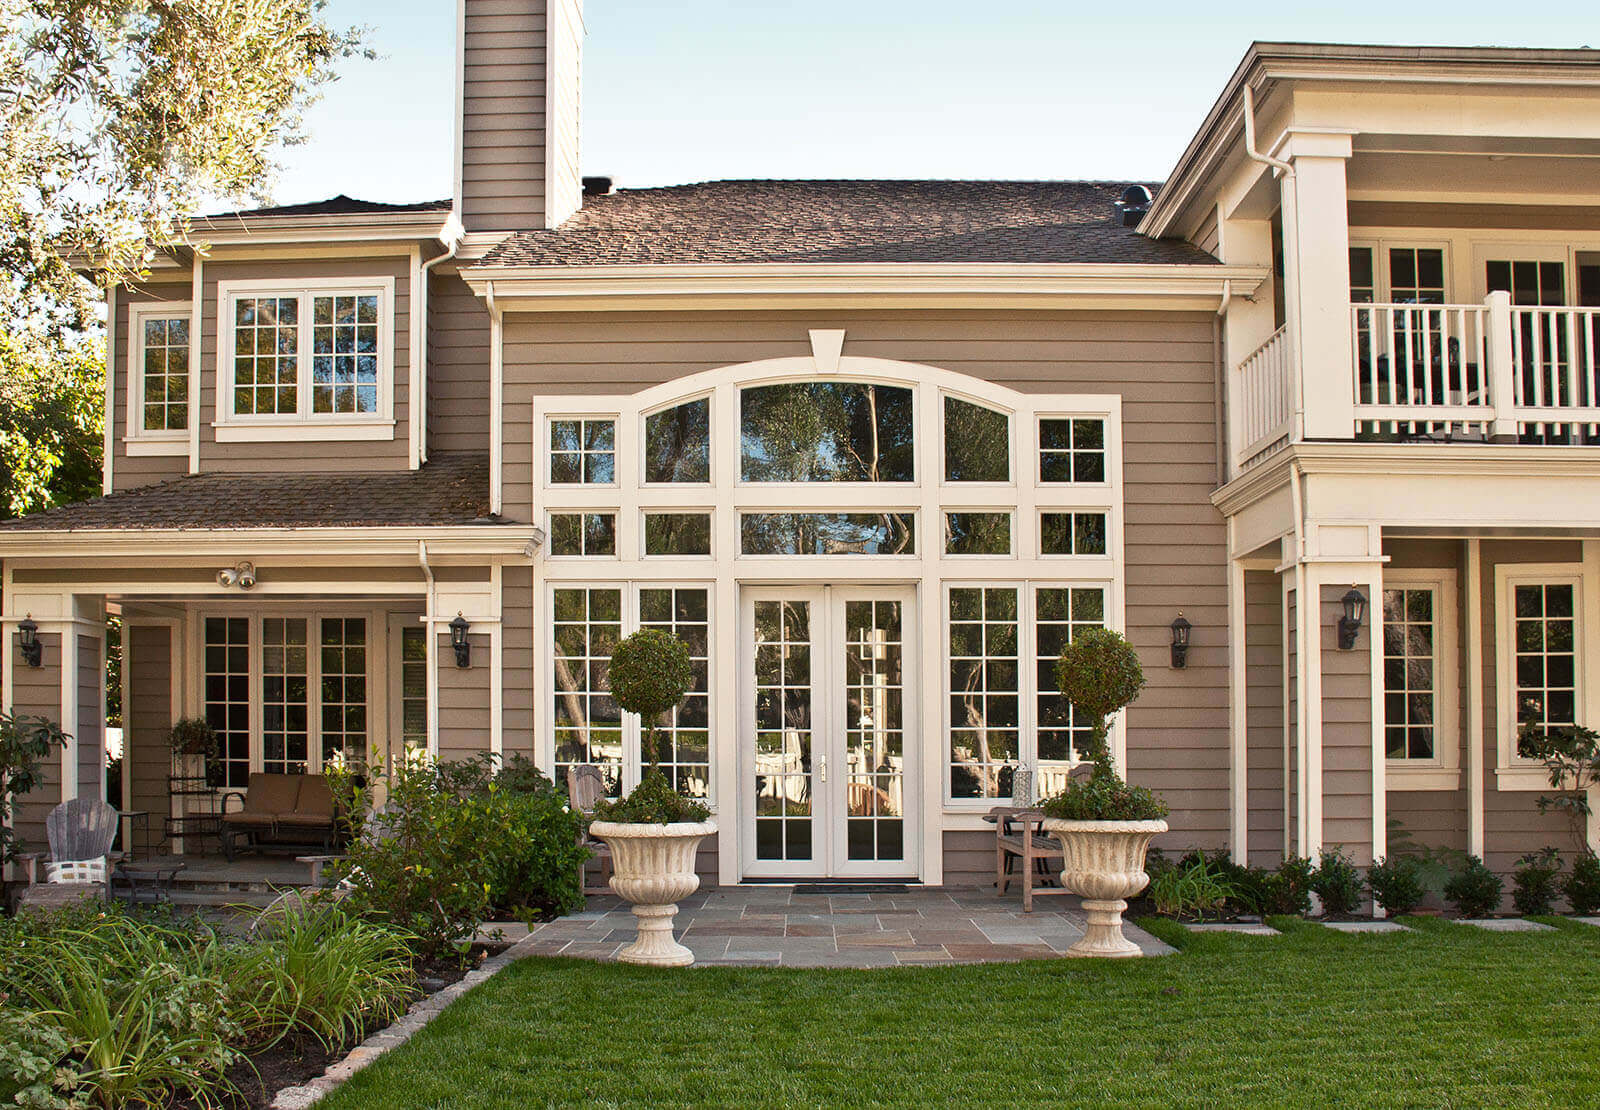 Large windows on back yard entrance with manicured lawn and ornamental stone pots